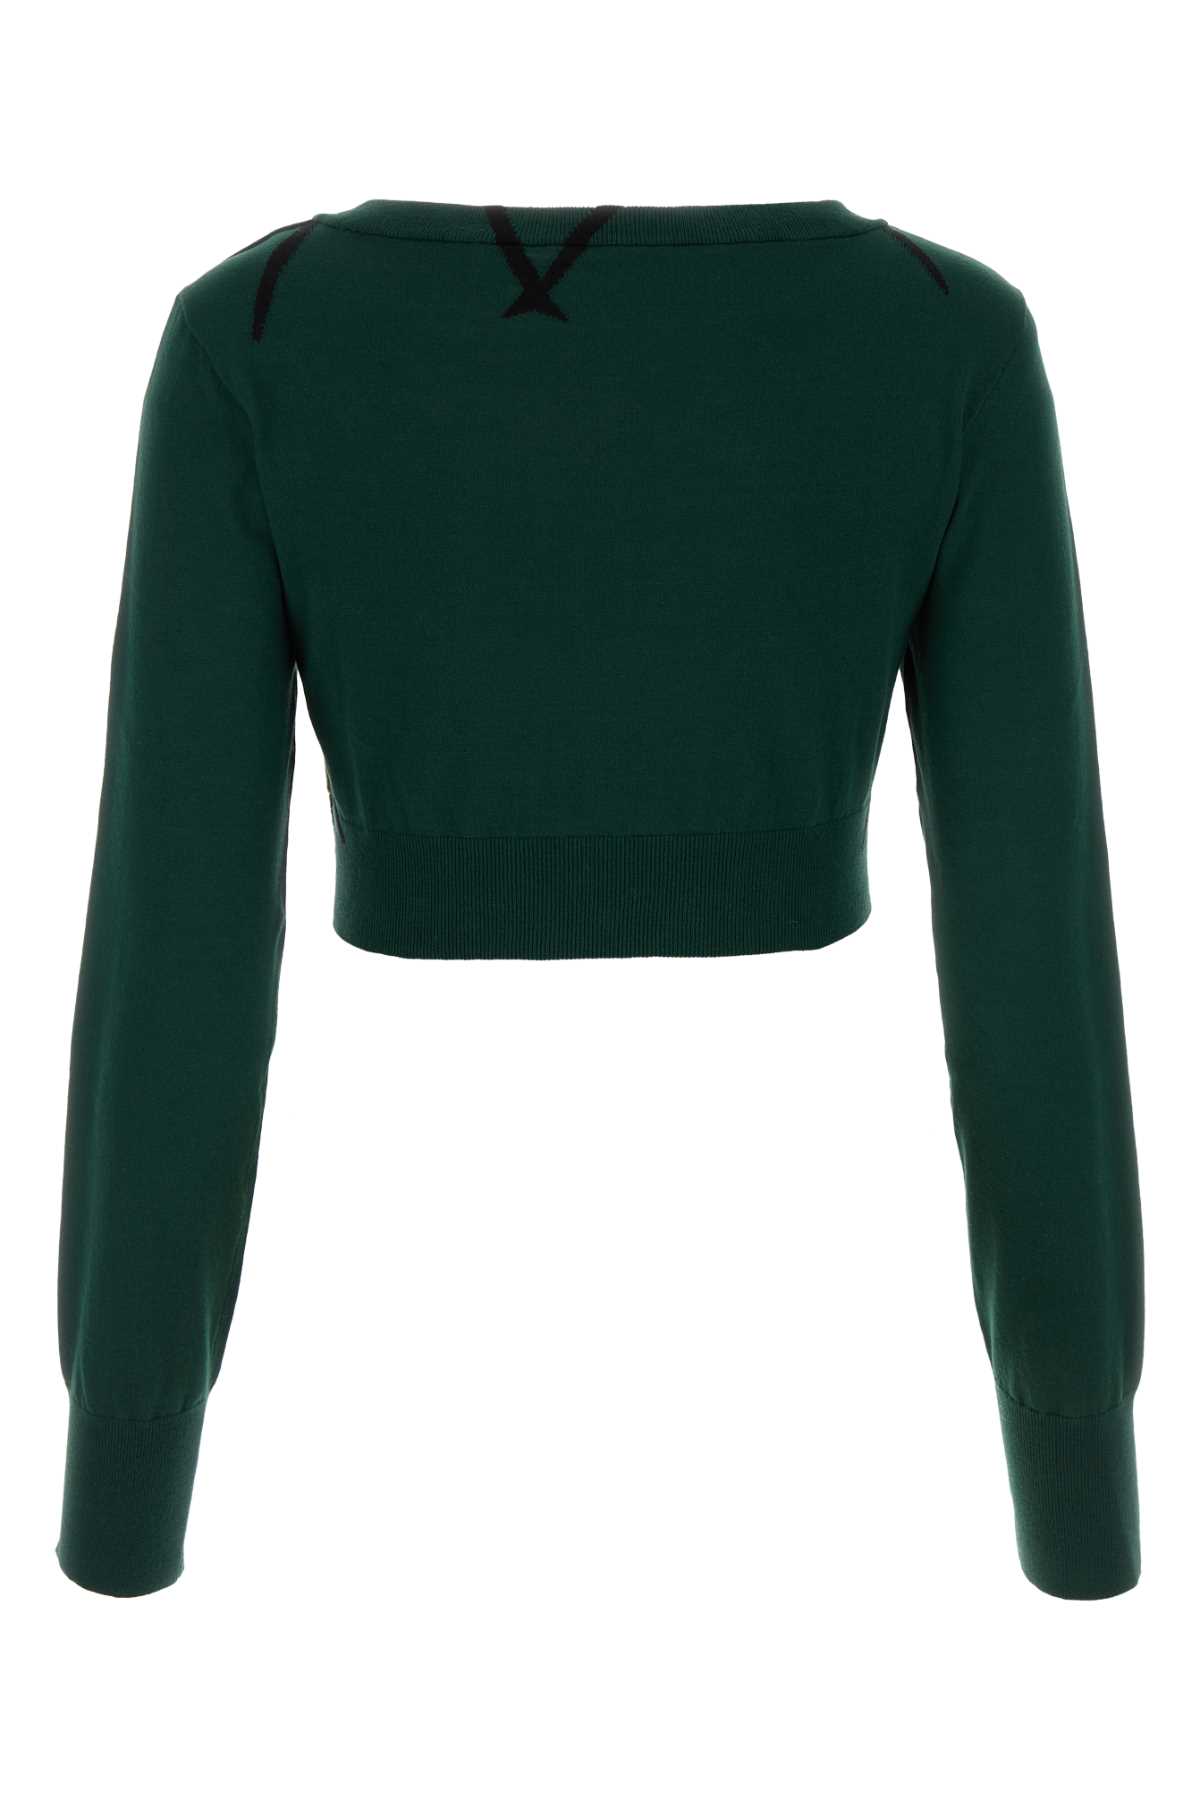 Burberry Bottle Green Cotton Sweater In Ivy